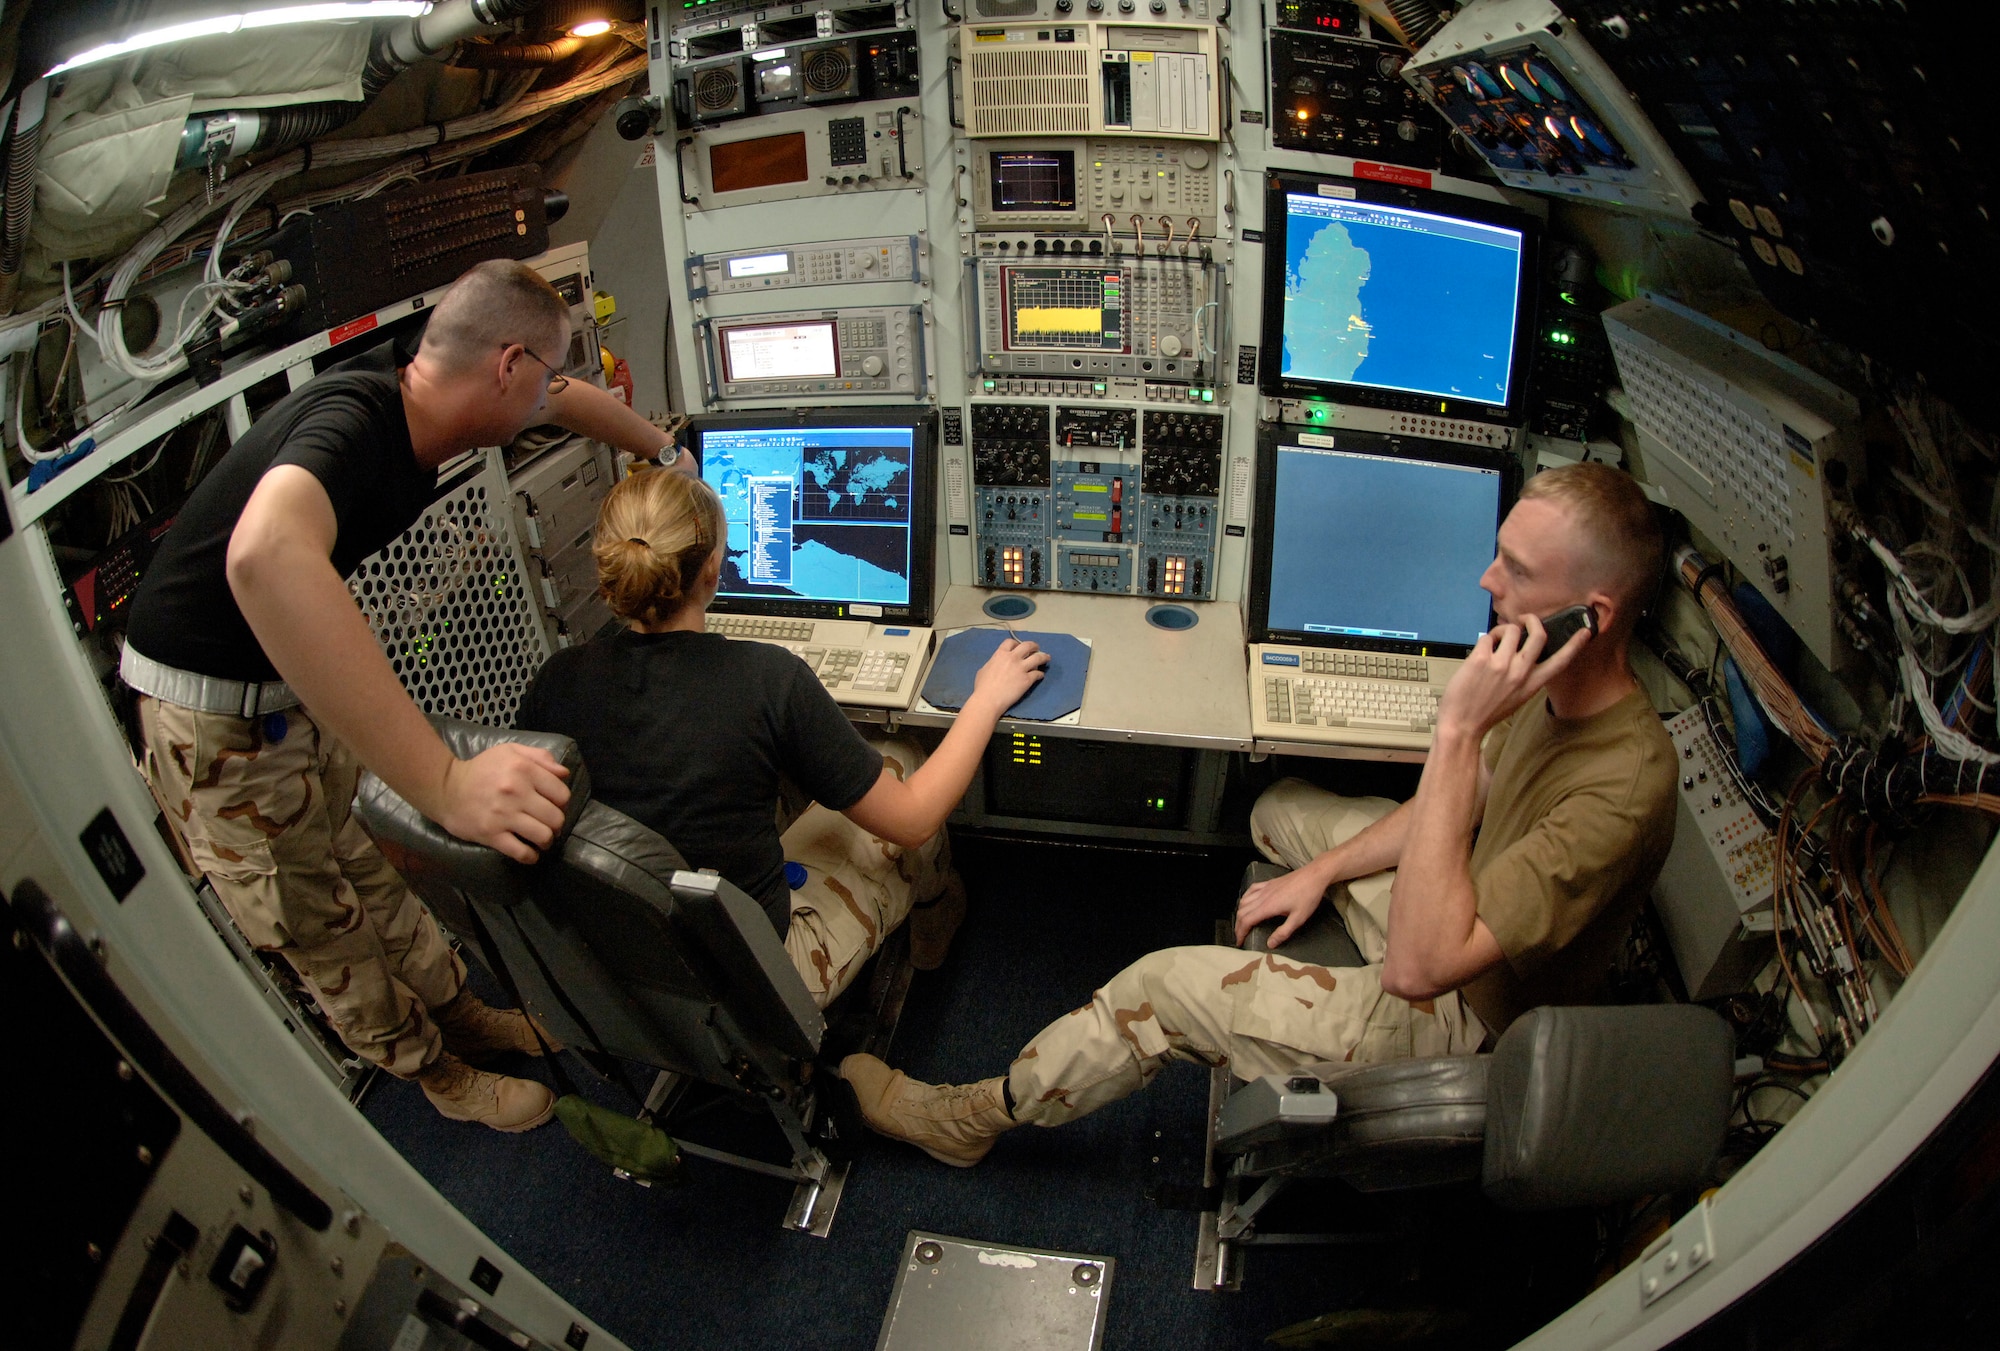 Senior Airman Weylin Oliver and Airman 1st Class Ami Grabowski create and route test signals from a maintenance station aboard an RC-135 Rivet Joint reconnaissance aircraft deployed to Southwest Asia while Senior Airman Dennis Kidwell fields a call from his maintenance supervisor. On average, it takes close to two years for these technicians to become 100 percent qualified to perform the 146 core tasks that are needed to maintain the planes sophisticated intelligence gathering hardware. The three are electronic warfare specialists. Airmen Grabowski and Oliver are from the 97th Intelligence Squadron from Offutt Air Force Base, Neb. Airman Kidwell is deployed from the 488th Intelligence Squadron, Royal Air Force Mildenhall, England. (U.S. Air Force photo/Master Sgt. Scott Wagers)